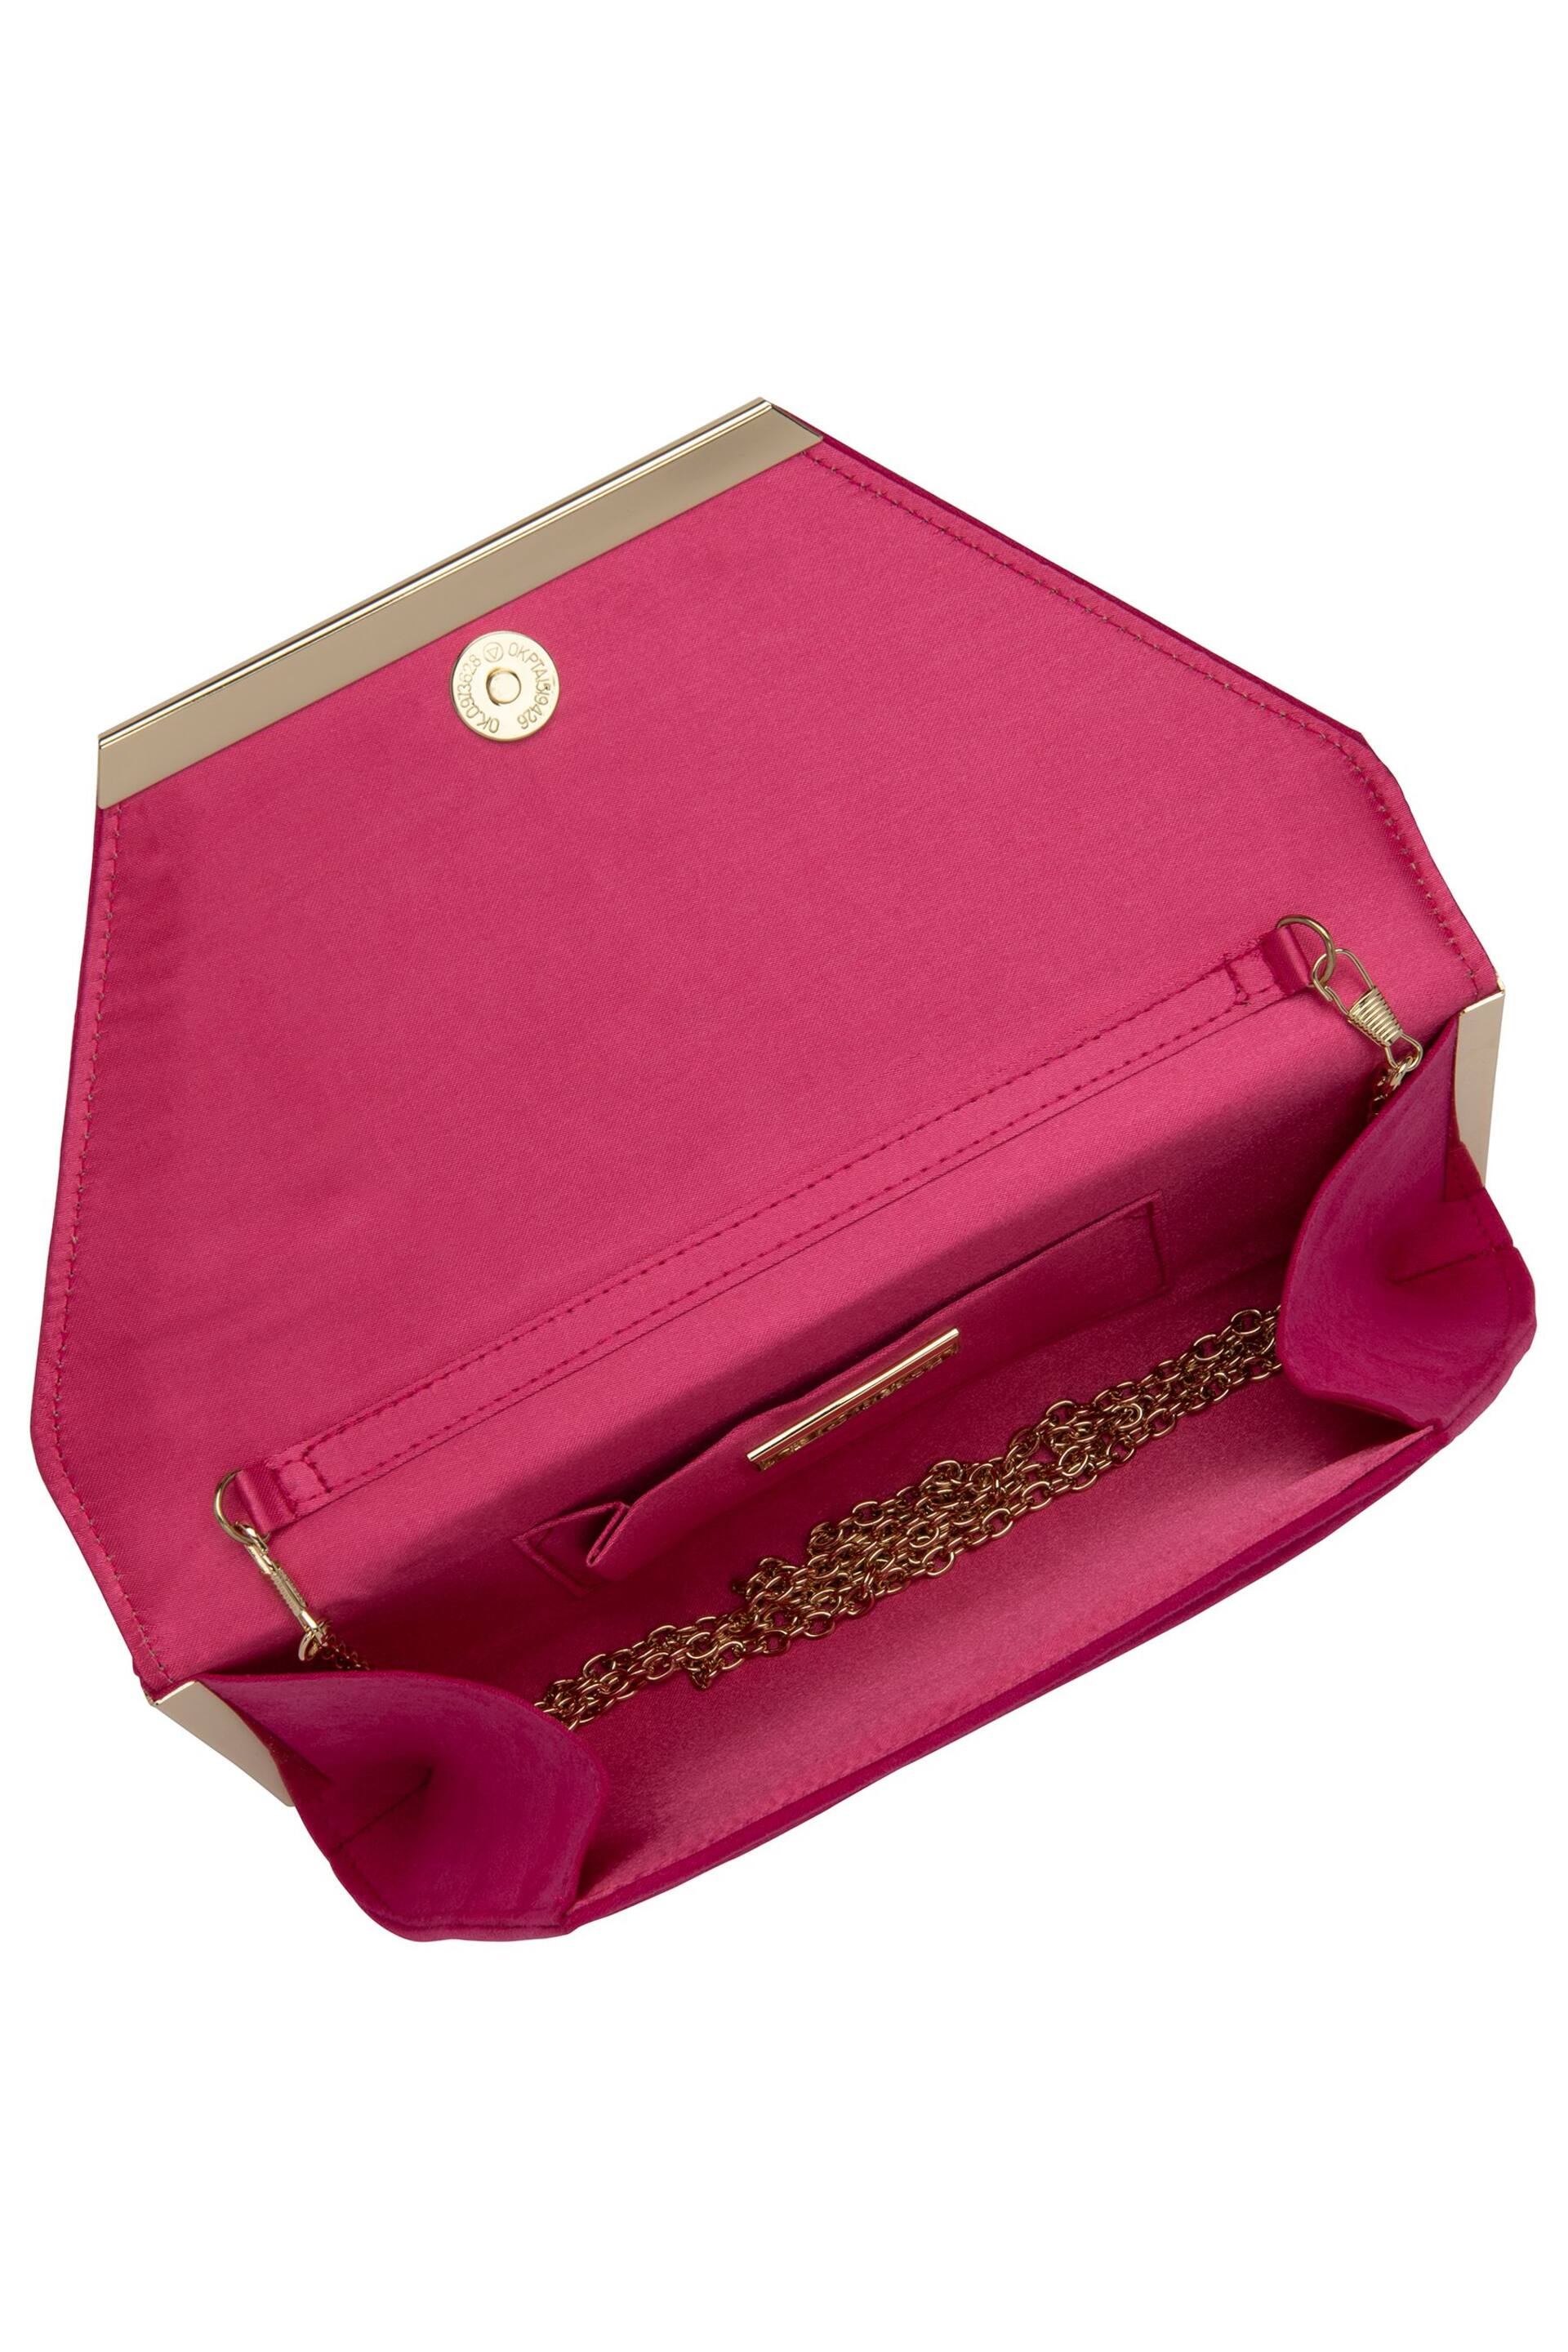 Lotus Pink Clutch Bag With Chain - Image 4 of 4